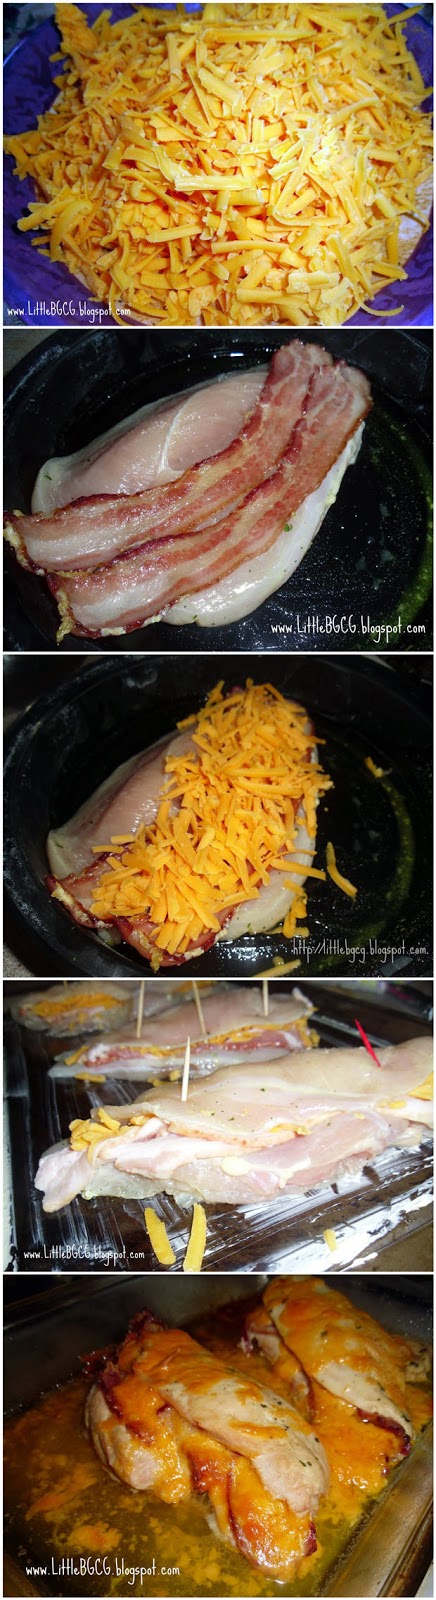 Bacon and Cheddar Cheese Stuffed Chicken